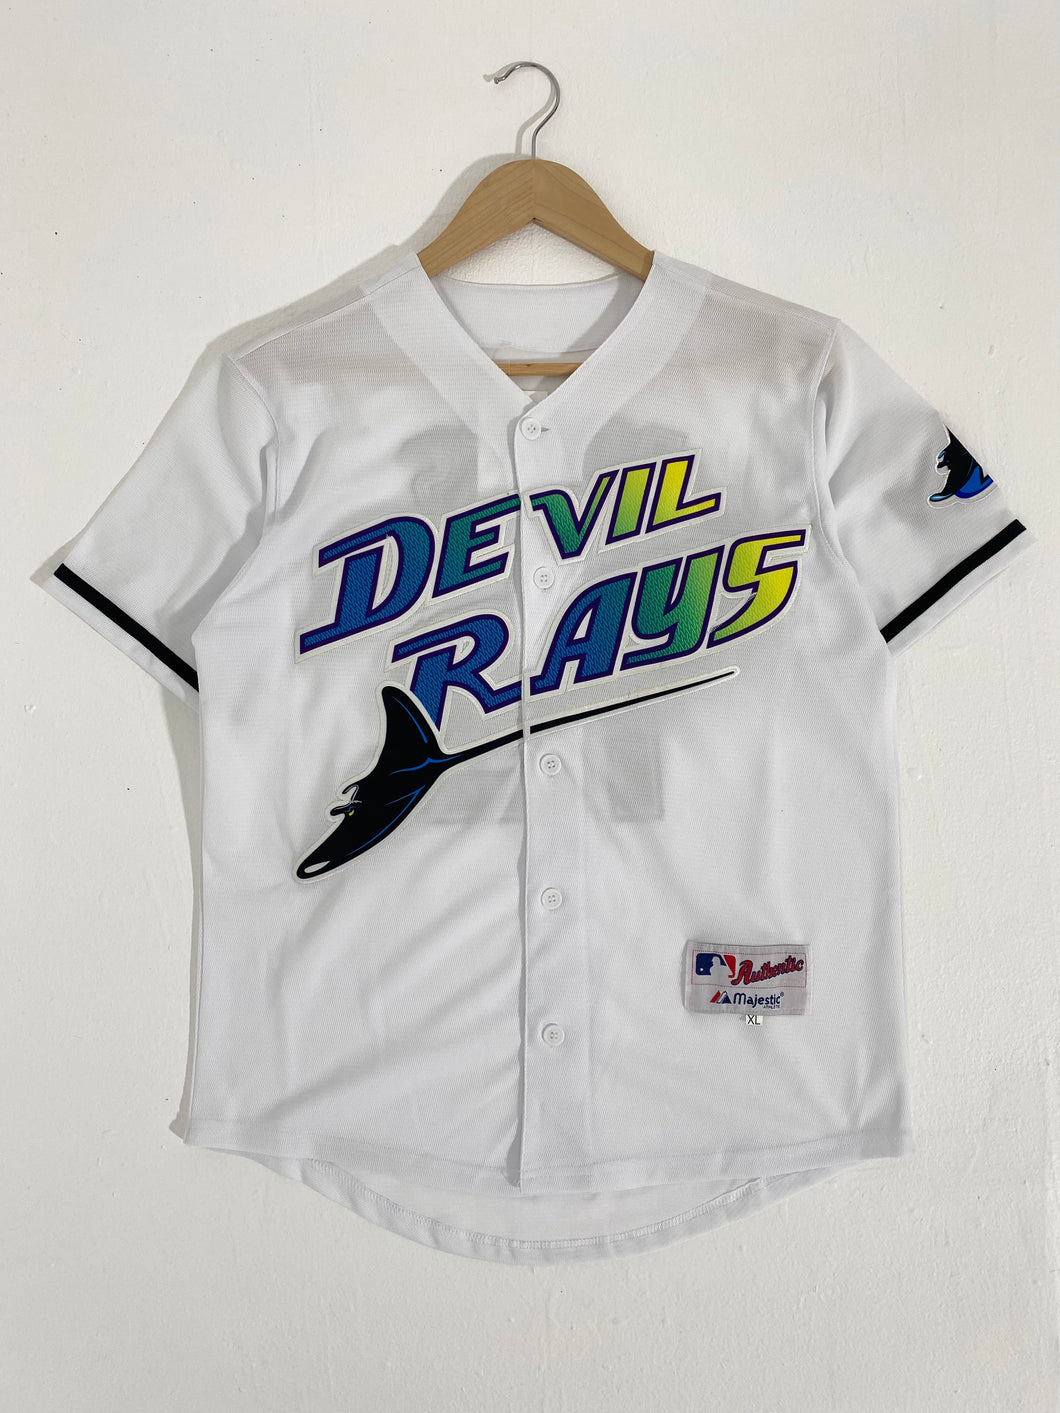 Wade Boggs Tampa Bay Devil Rays Mitchell & Ness MLB Authentic